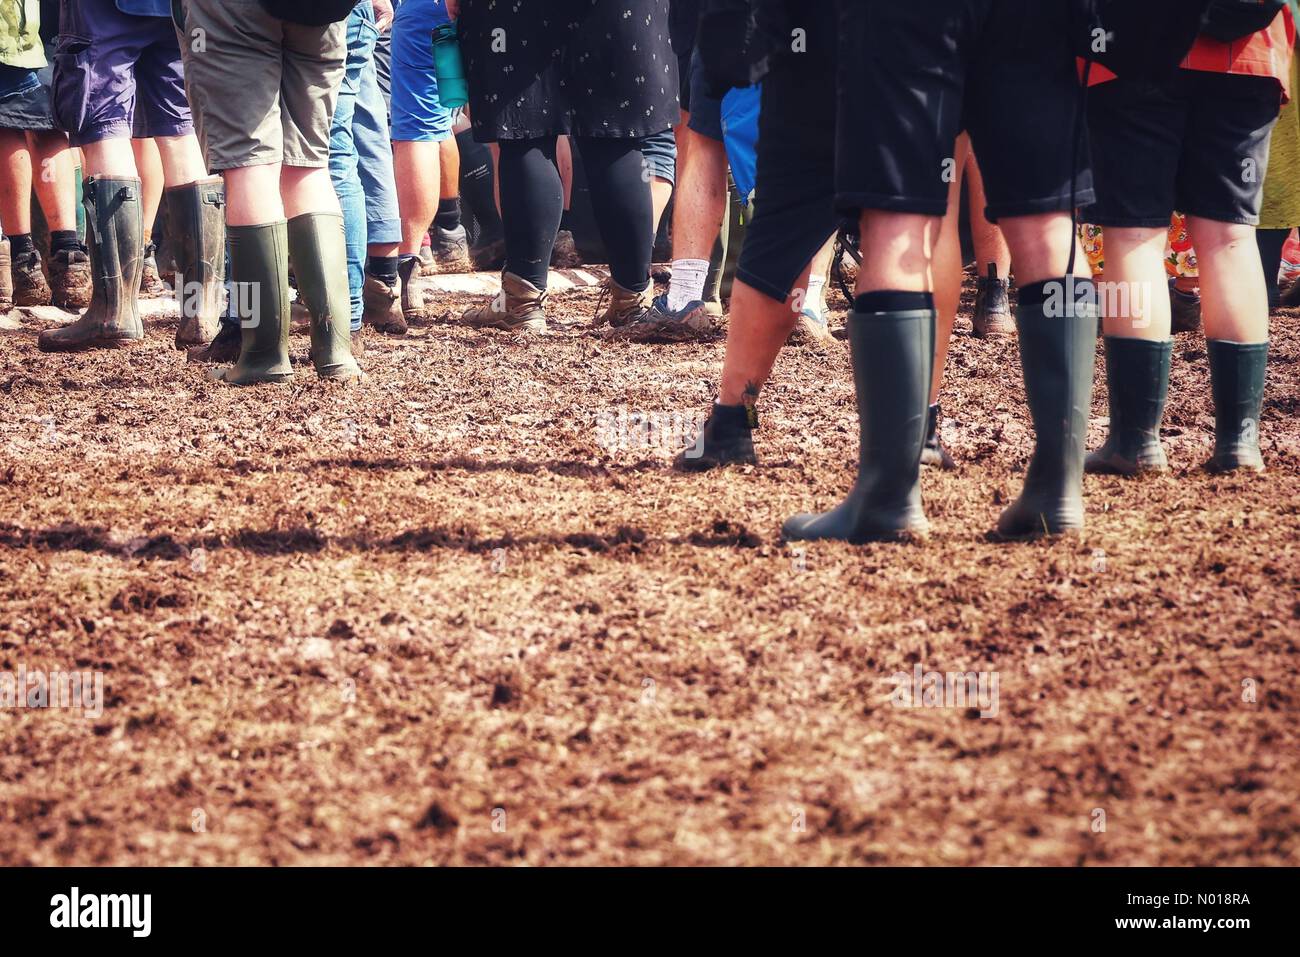 Green Man festival, Brecon Beacons, Wales, UK. 19th August, 2023. Boots de rigeur as wellied crowds enjoy mud at Green Man festival 2023. Credit: nidpor/Empics/Alamy Live News Stock Photo